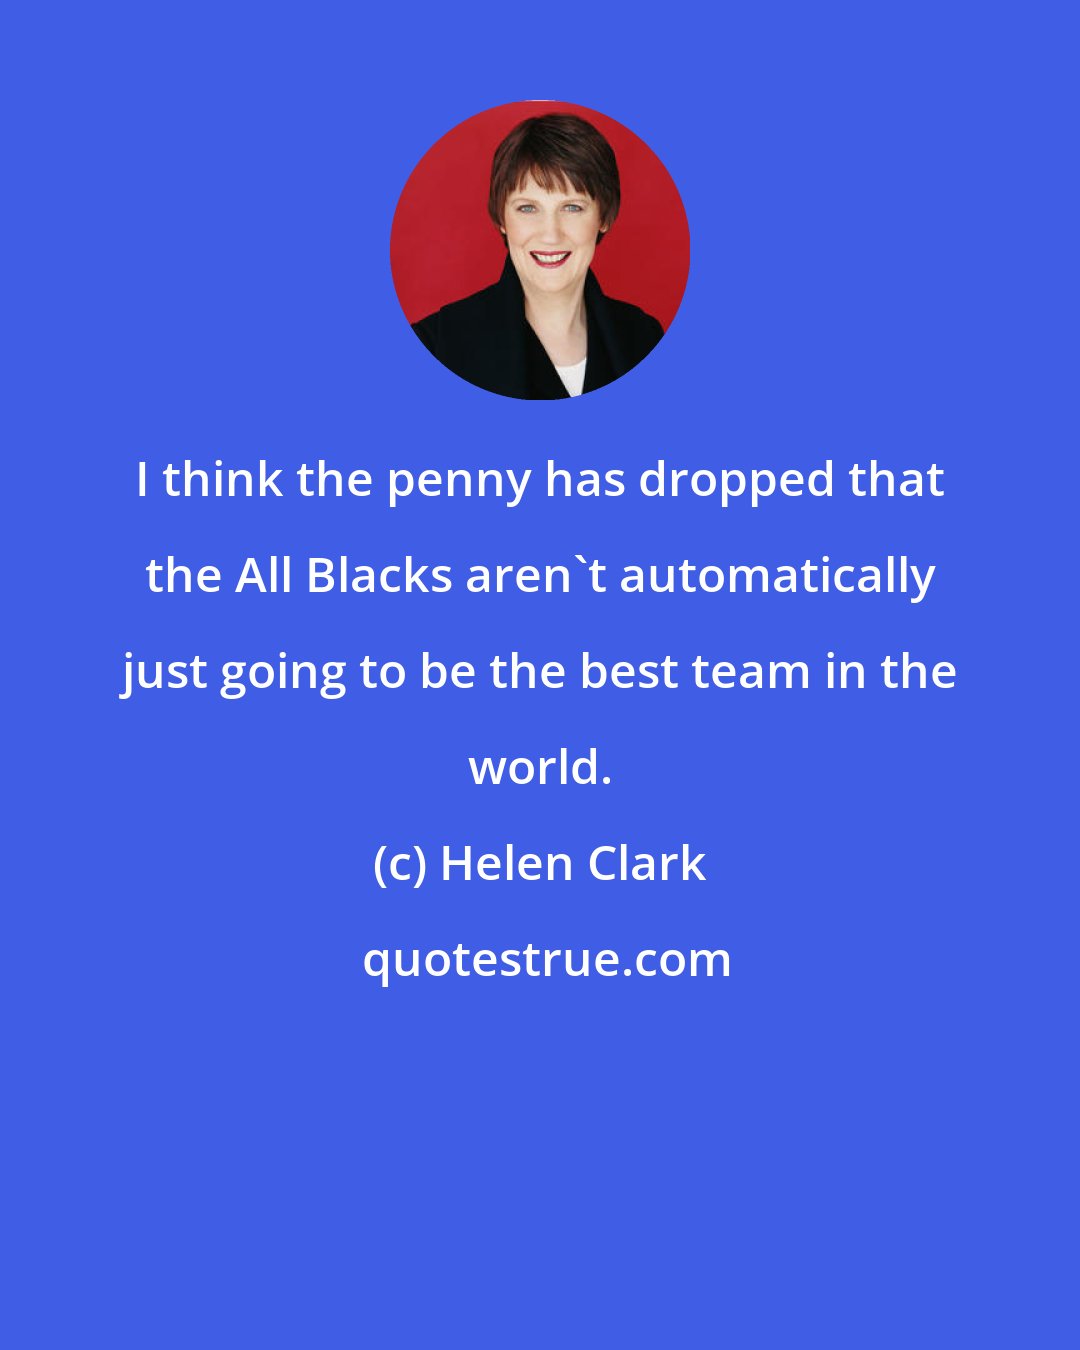 Helen Clark: I think the penny has dropped that the All Blacks aren't automatically just going to be the best team in the world.